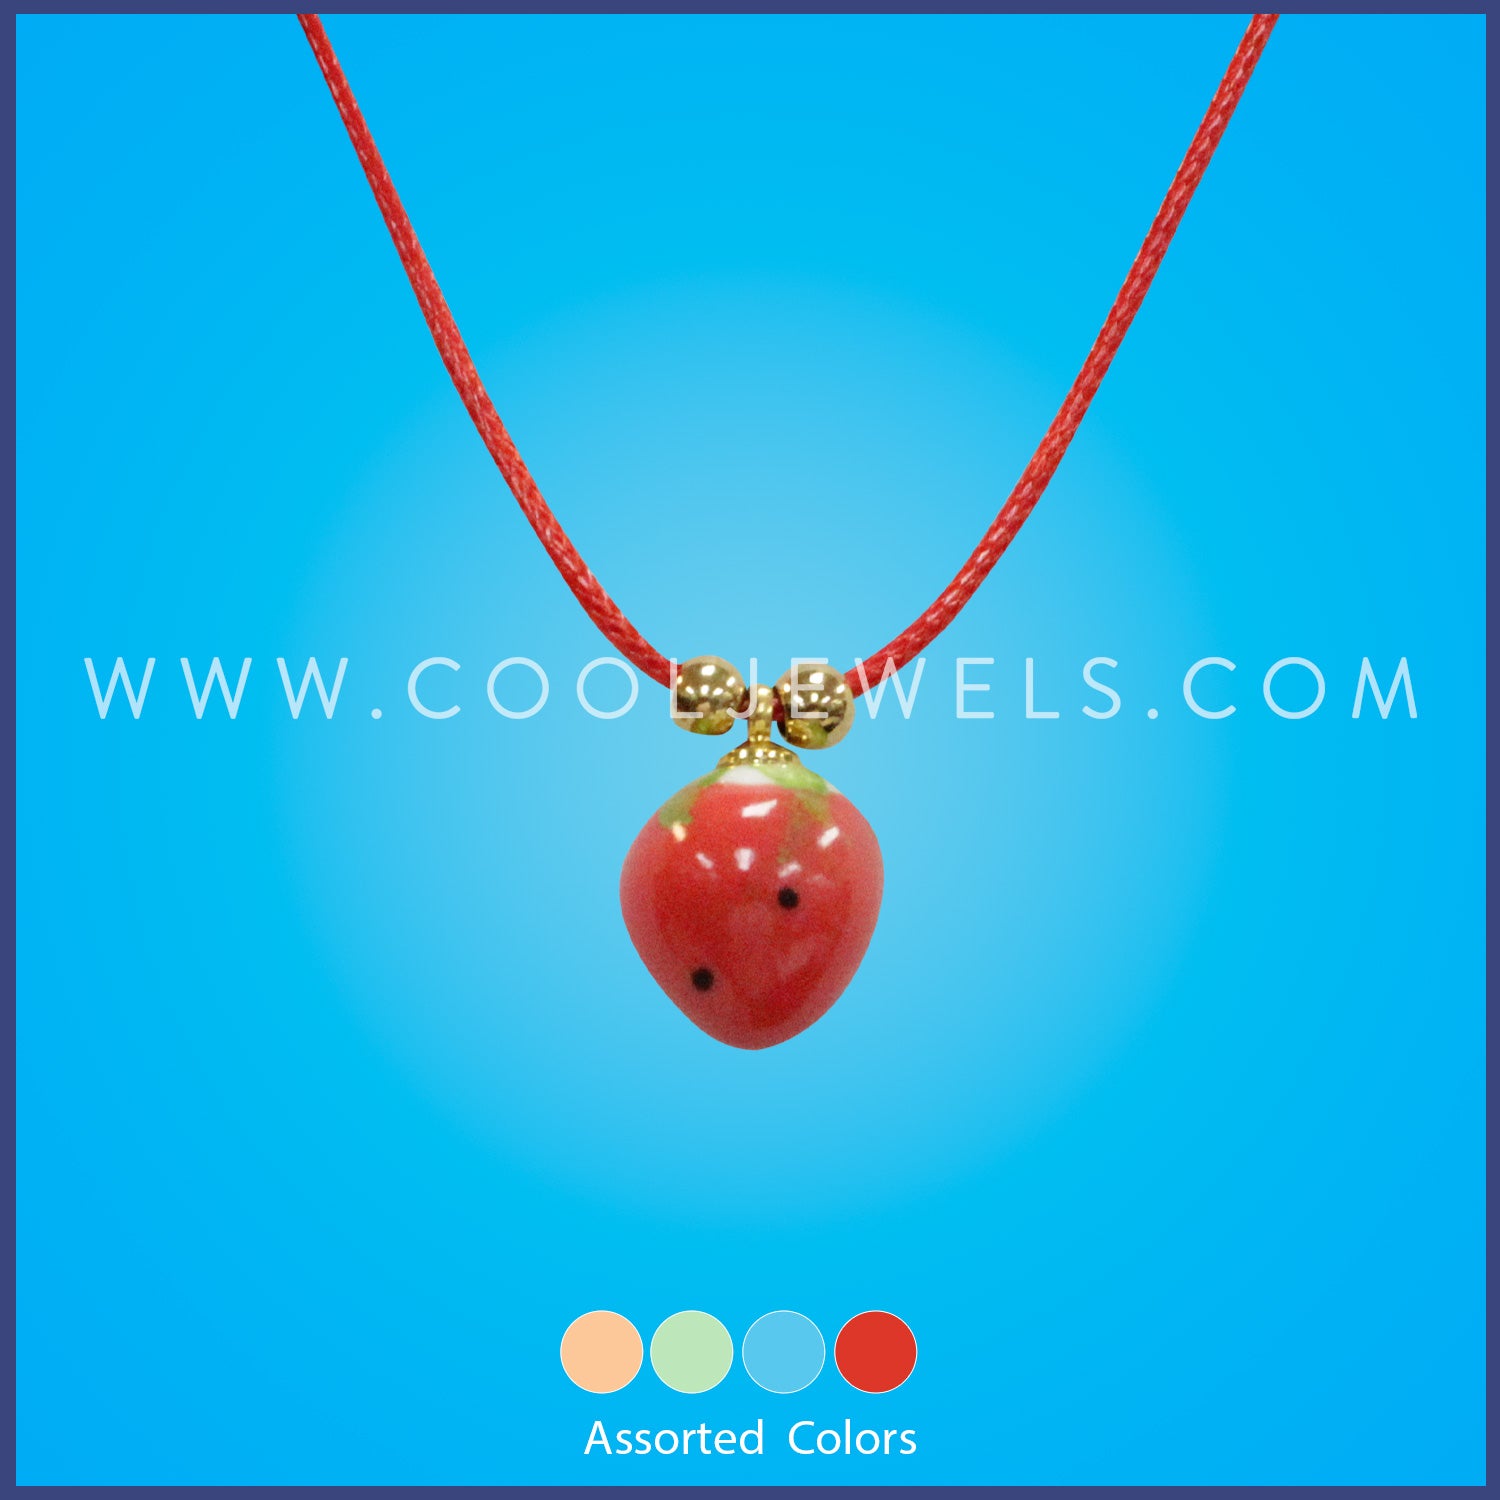 SLIDER CORD NECKLACE WITH COLORED STRAWBERRY PENDANT - ASSORTED